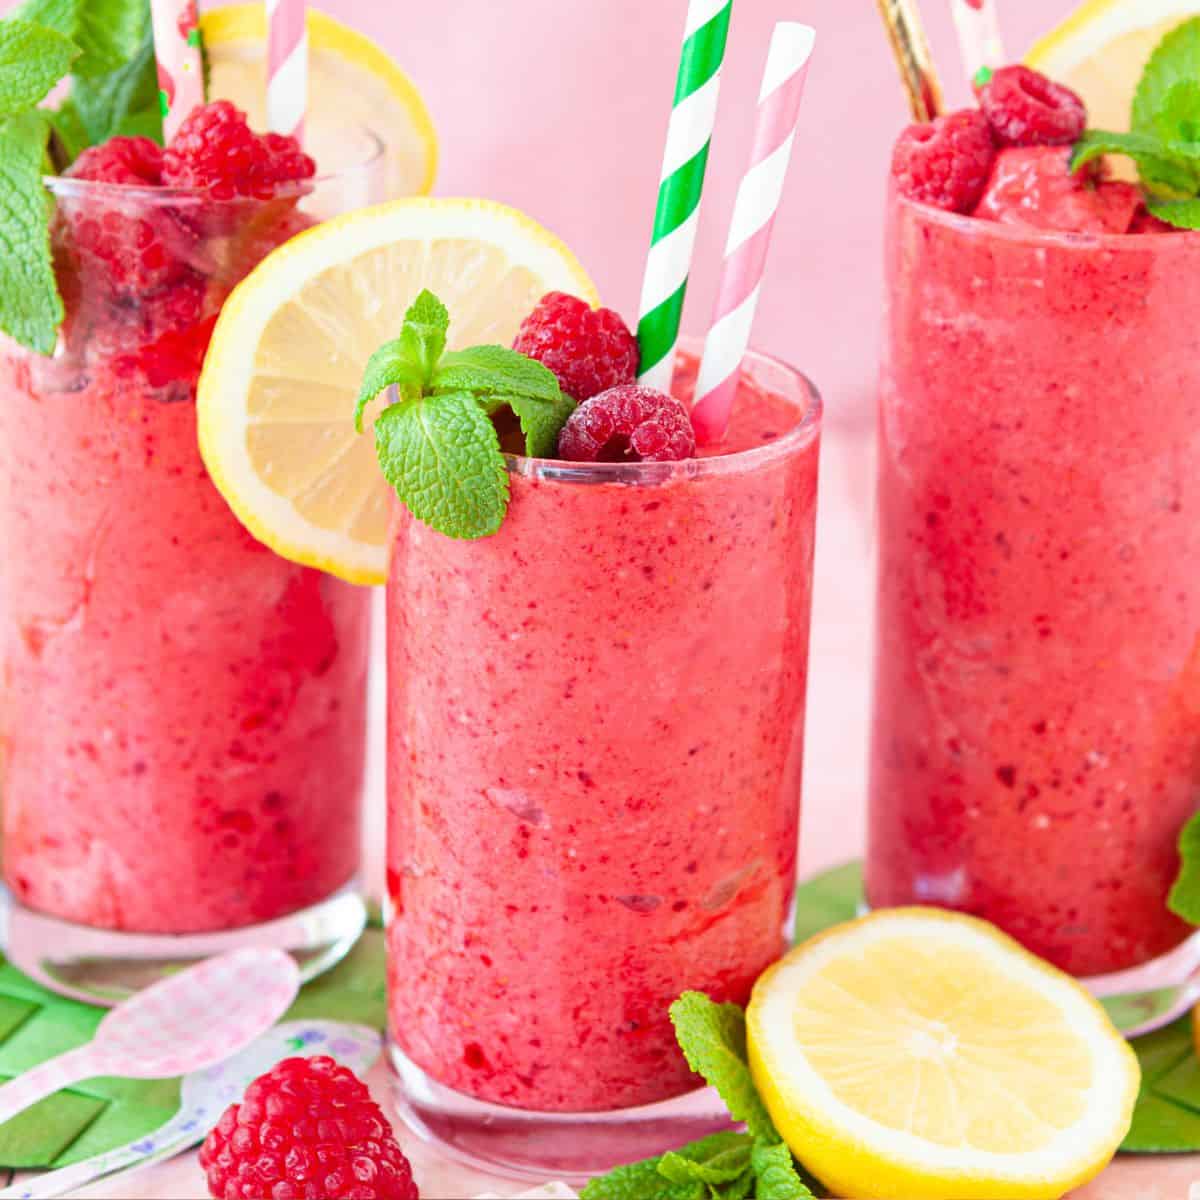 Three glasses of fruit cocktail drink garnished with mint leaves, raspberries and lemon slices.